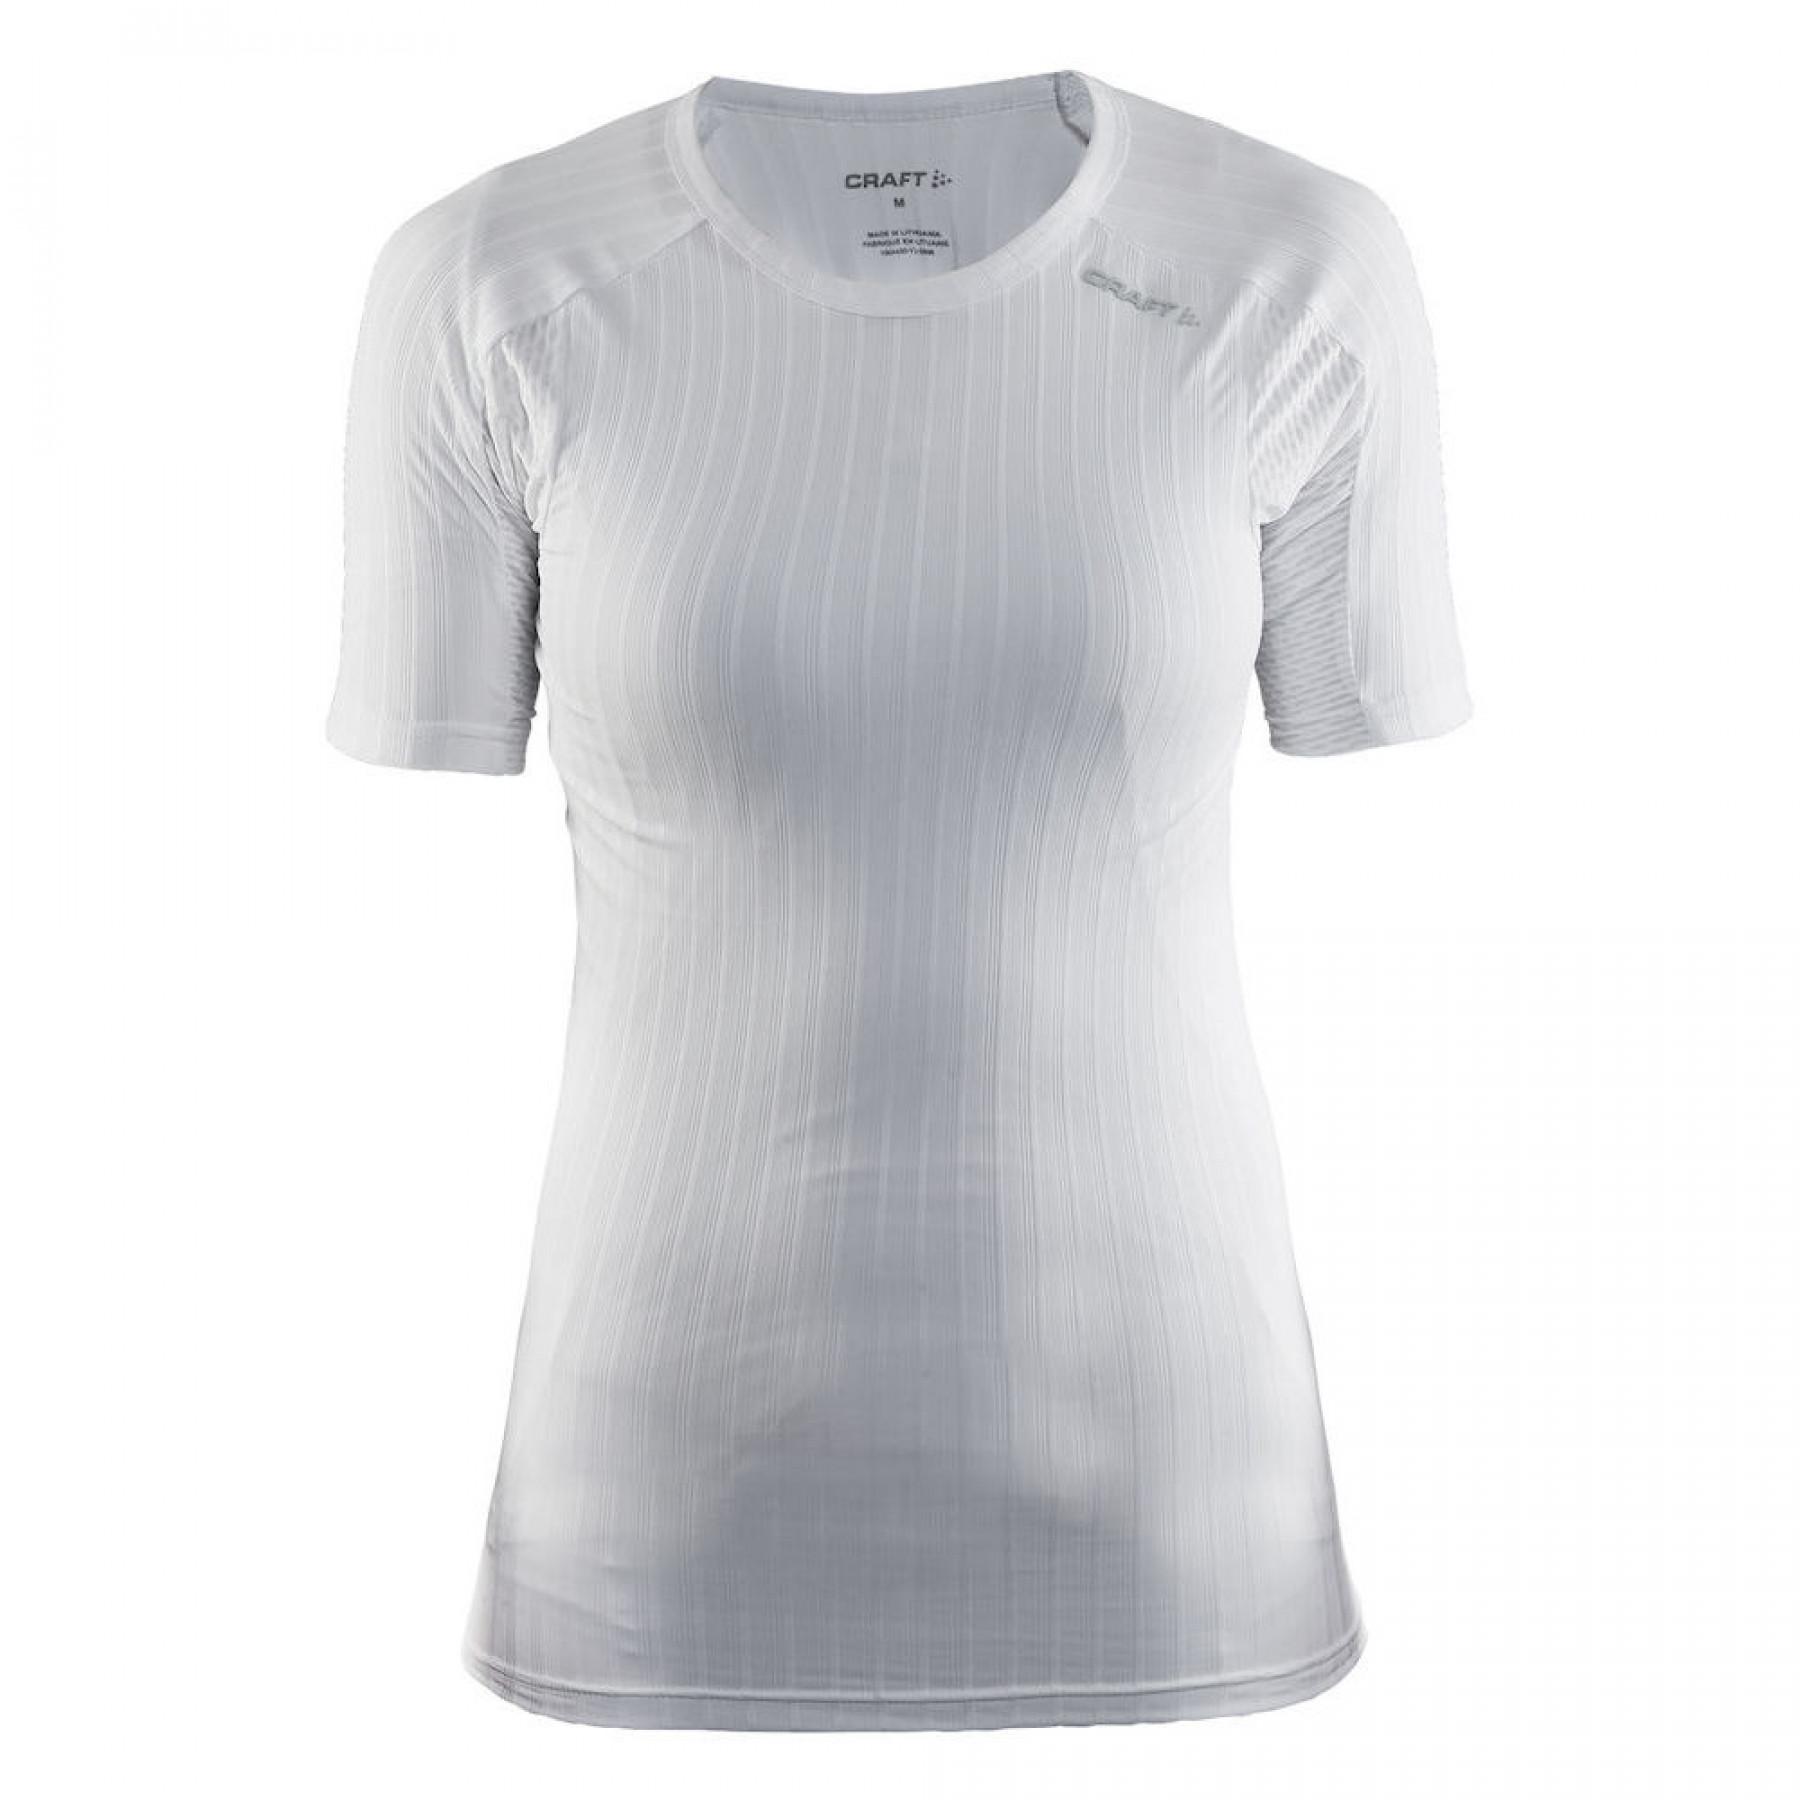 Camiseta de mujer Craft be active extreme 2.0